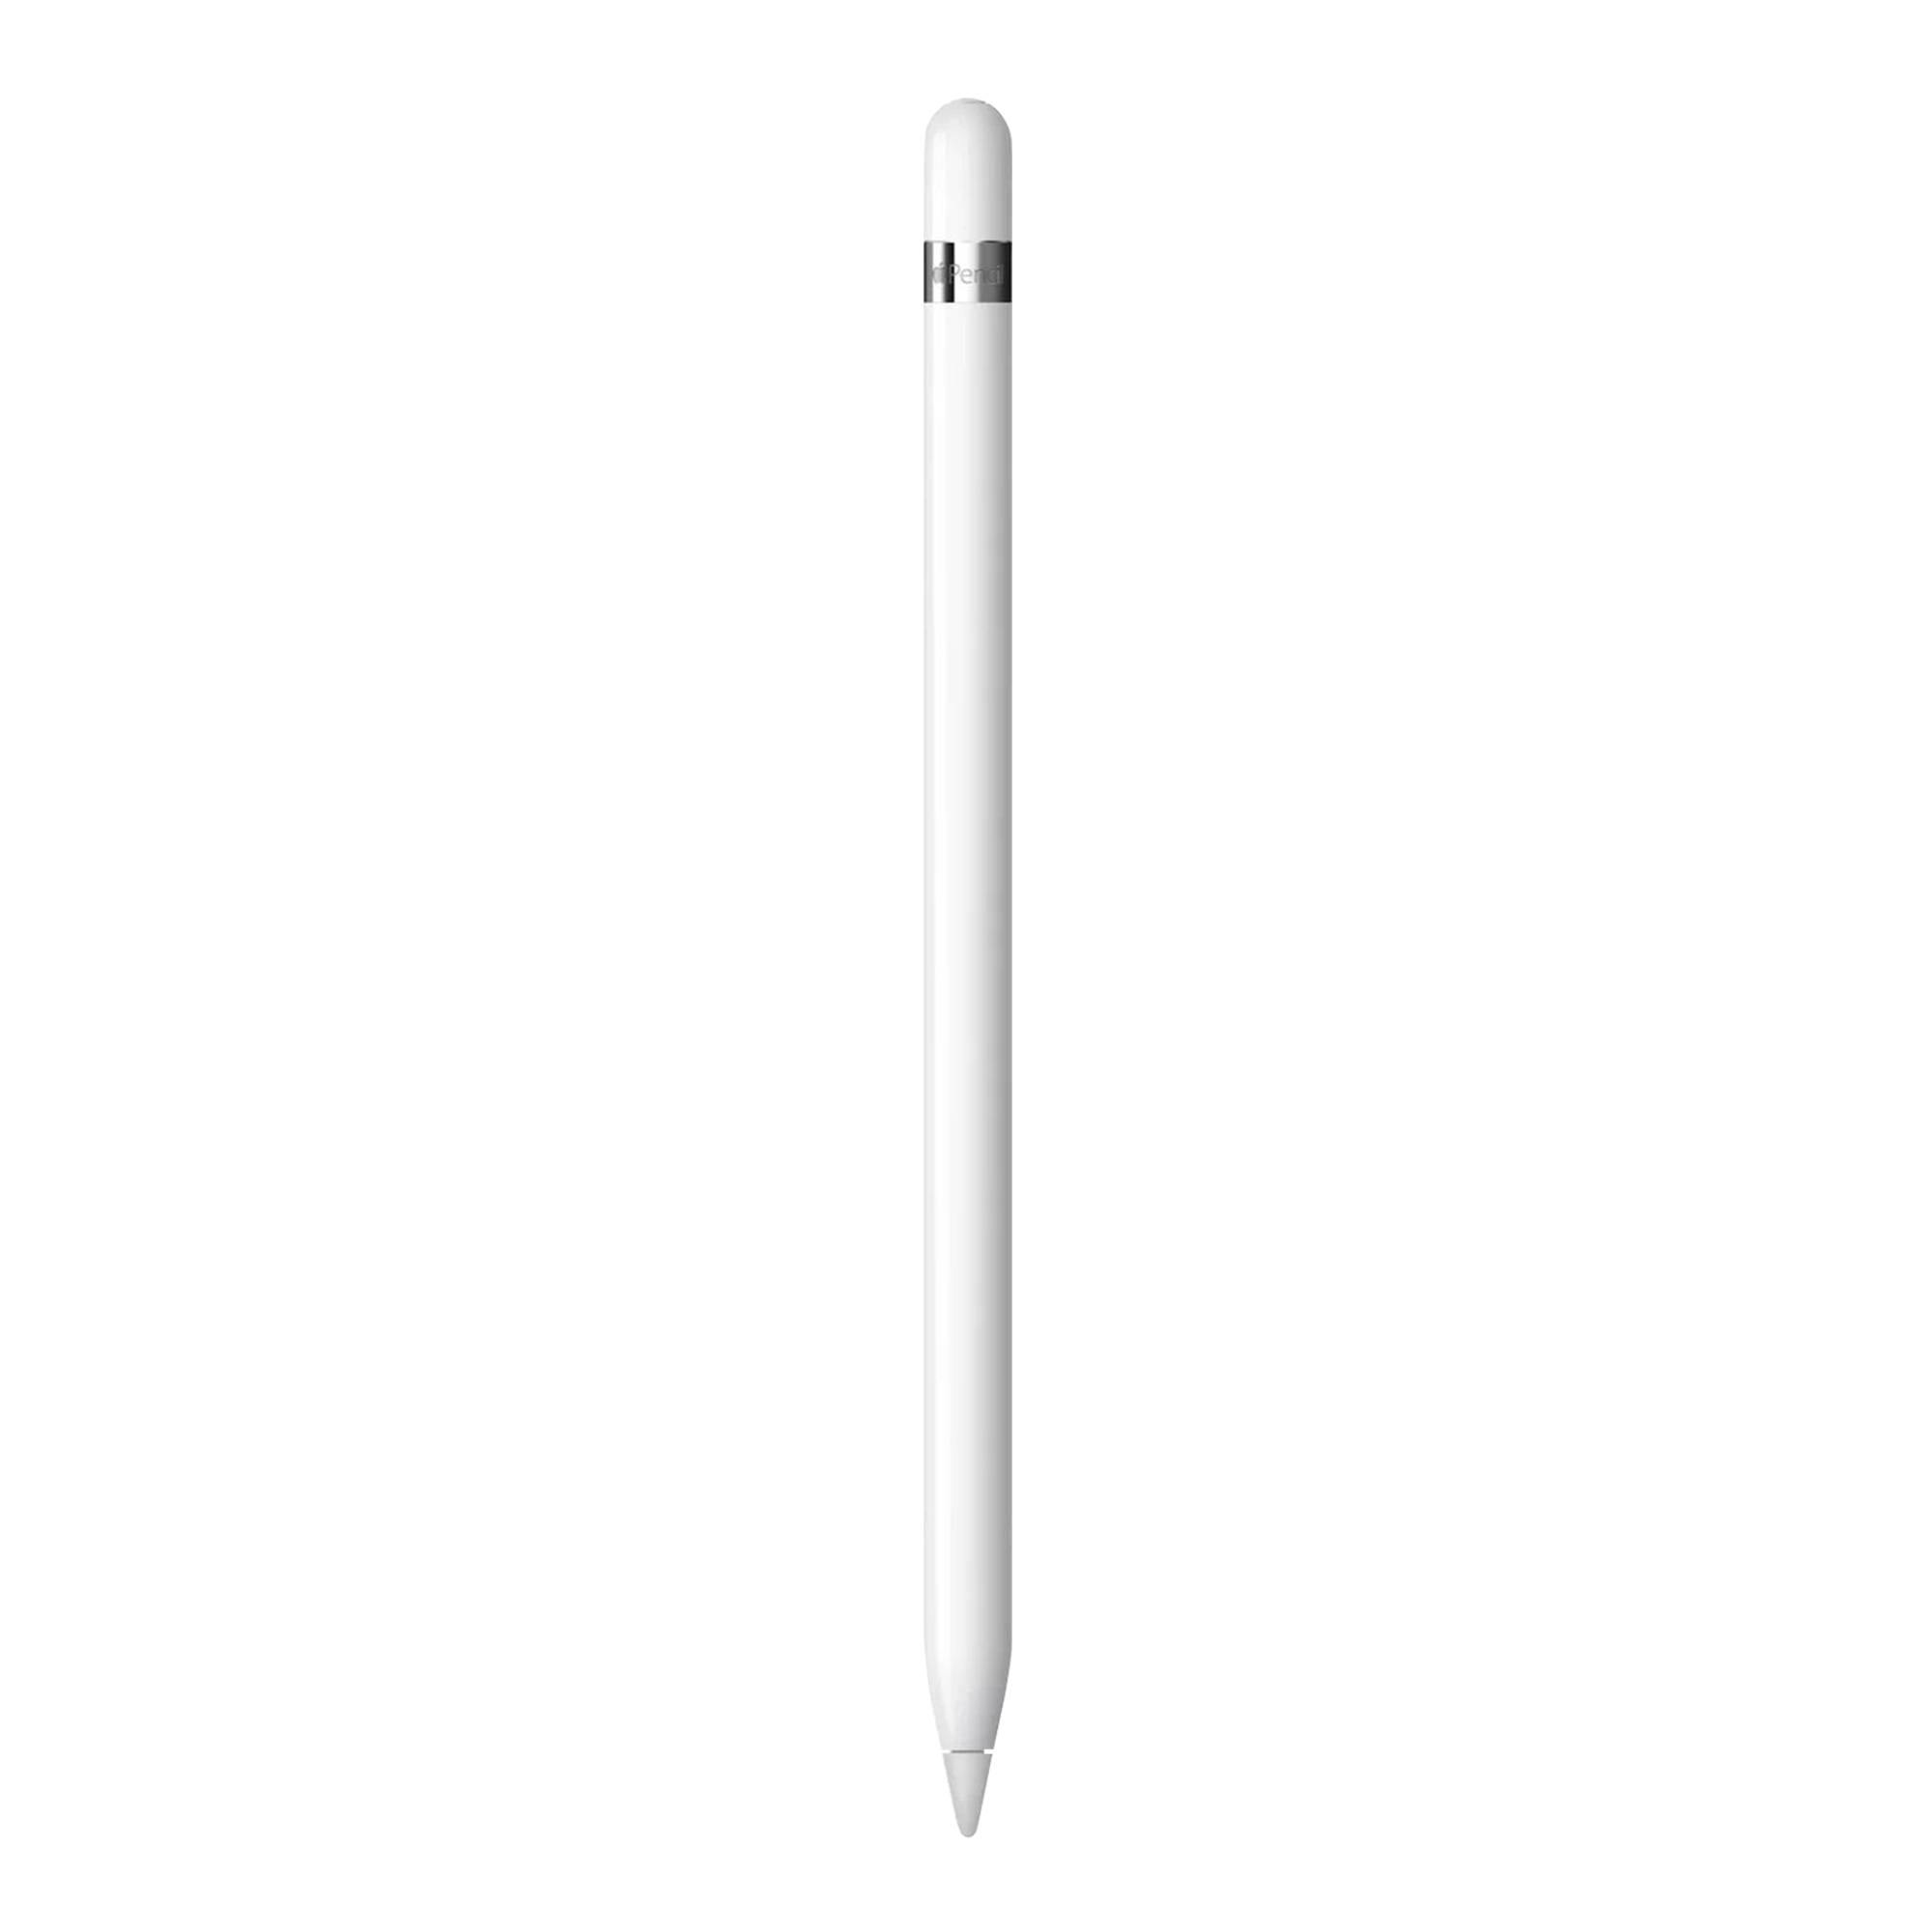 Buy Apple Pencil 1st Generation with Best Price